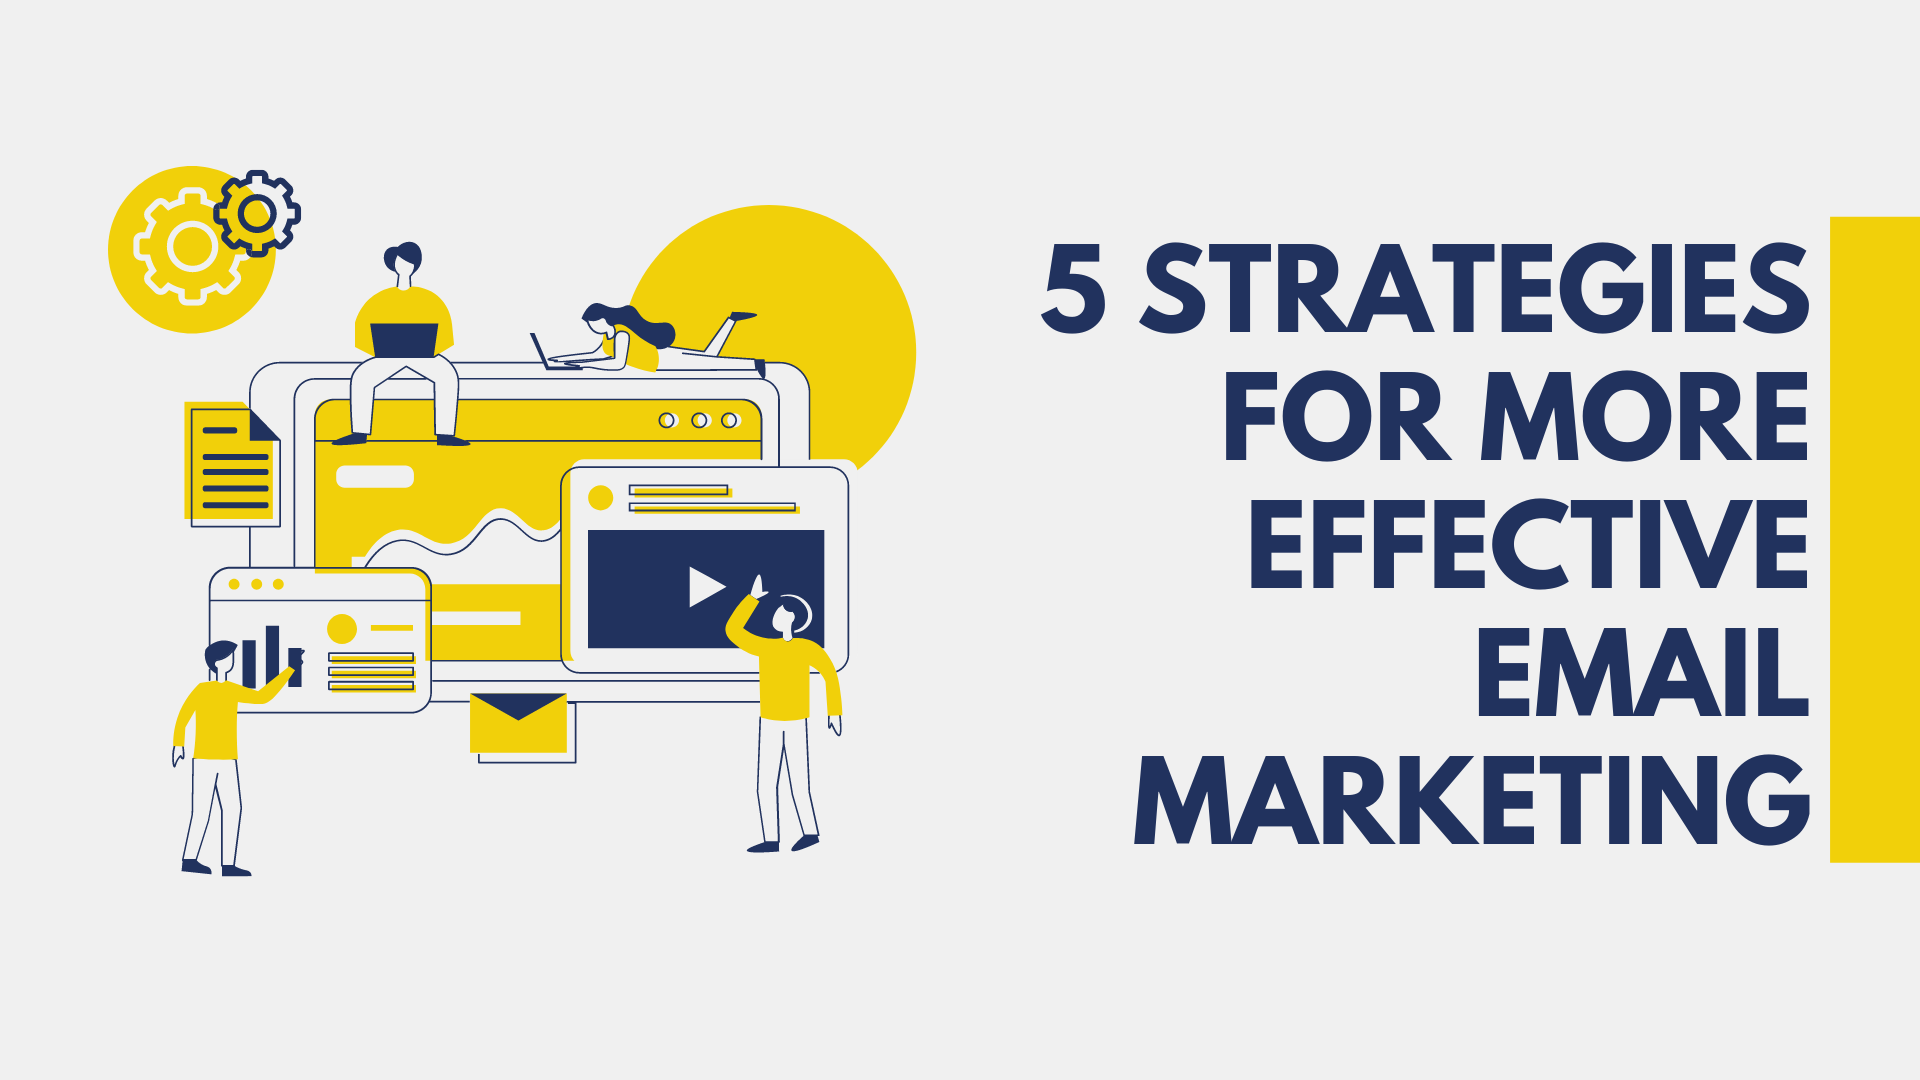 5 Strategies For More Effective Email Marketing